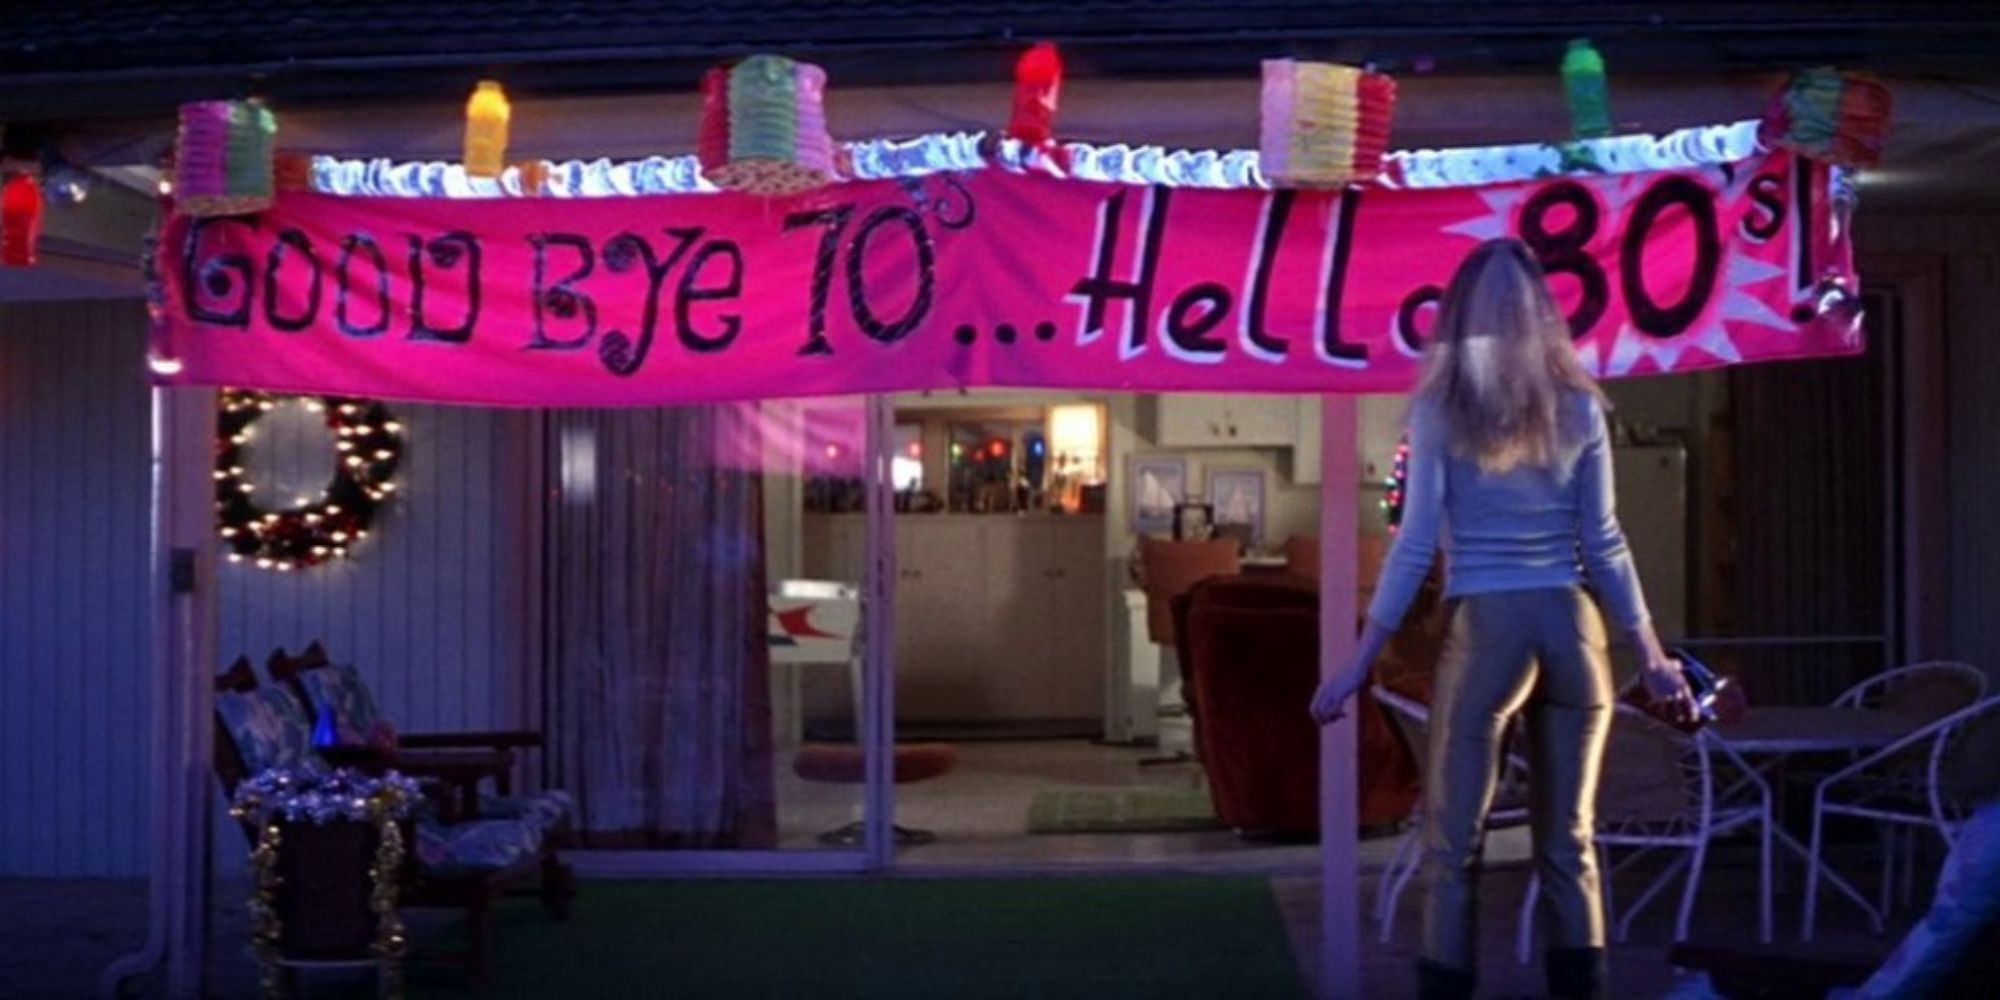 New years eve party in 'Boogie Nights'